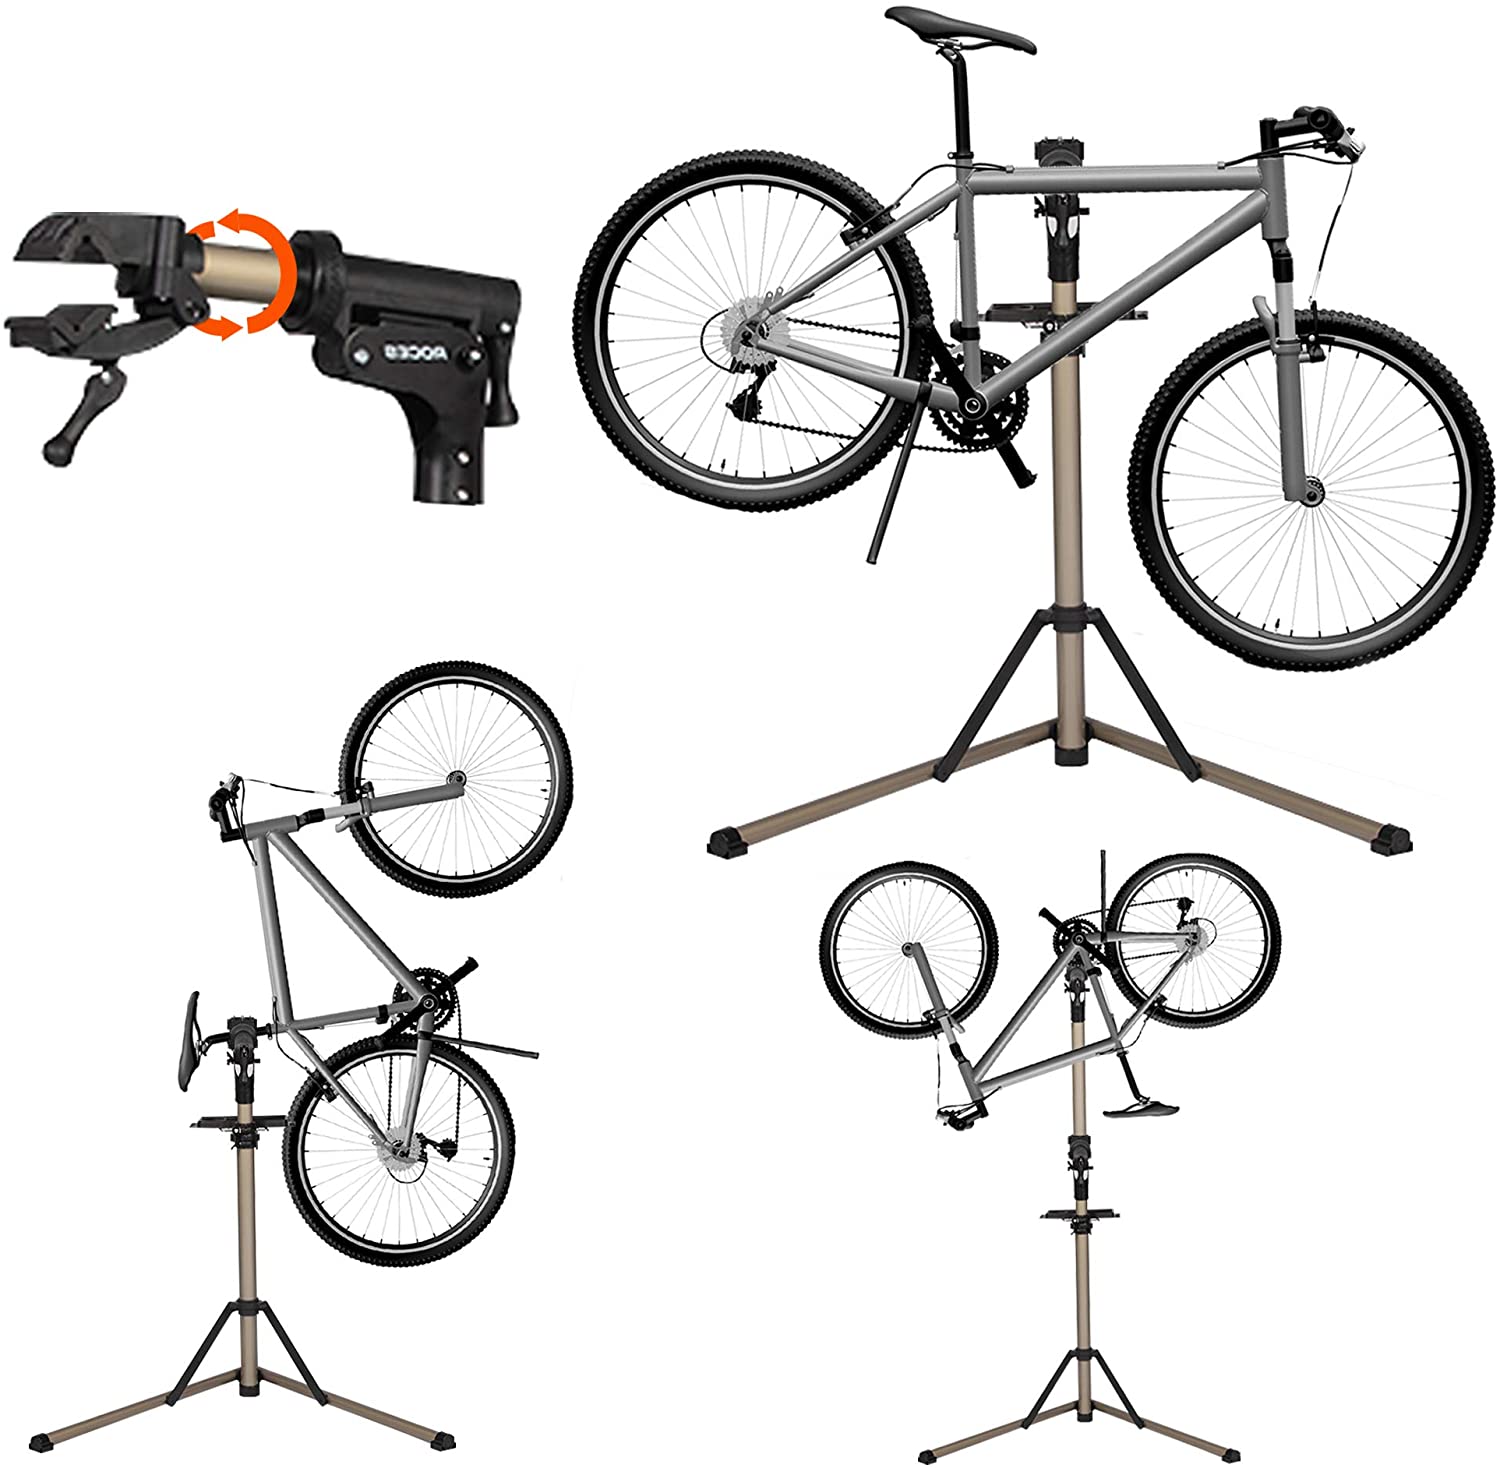 Foldable Bike Repair Stand Adjustable Height Bicycle Mechanics Stand Portable Bike Workstand for Home or Professional Team Use with Plate Tools Holder Support up to 60LBS